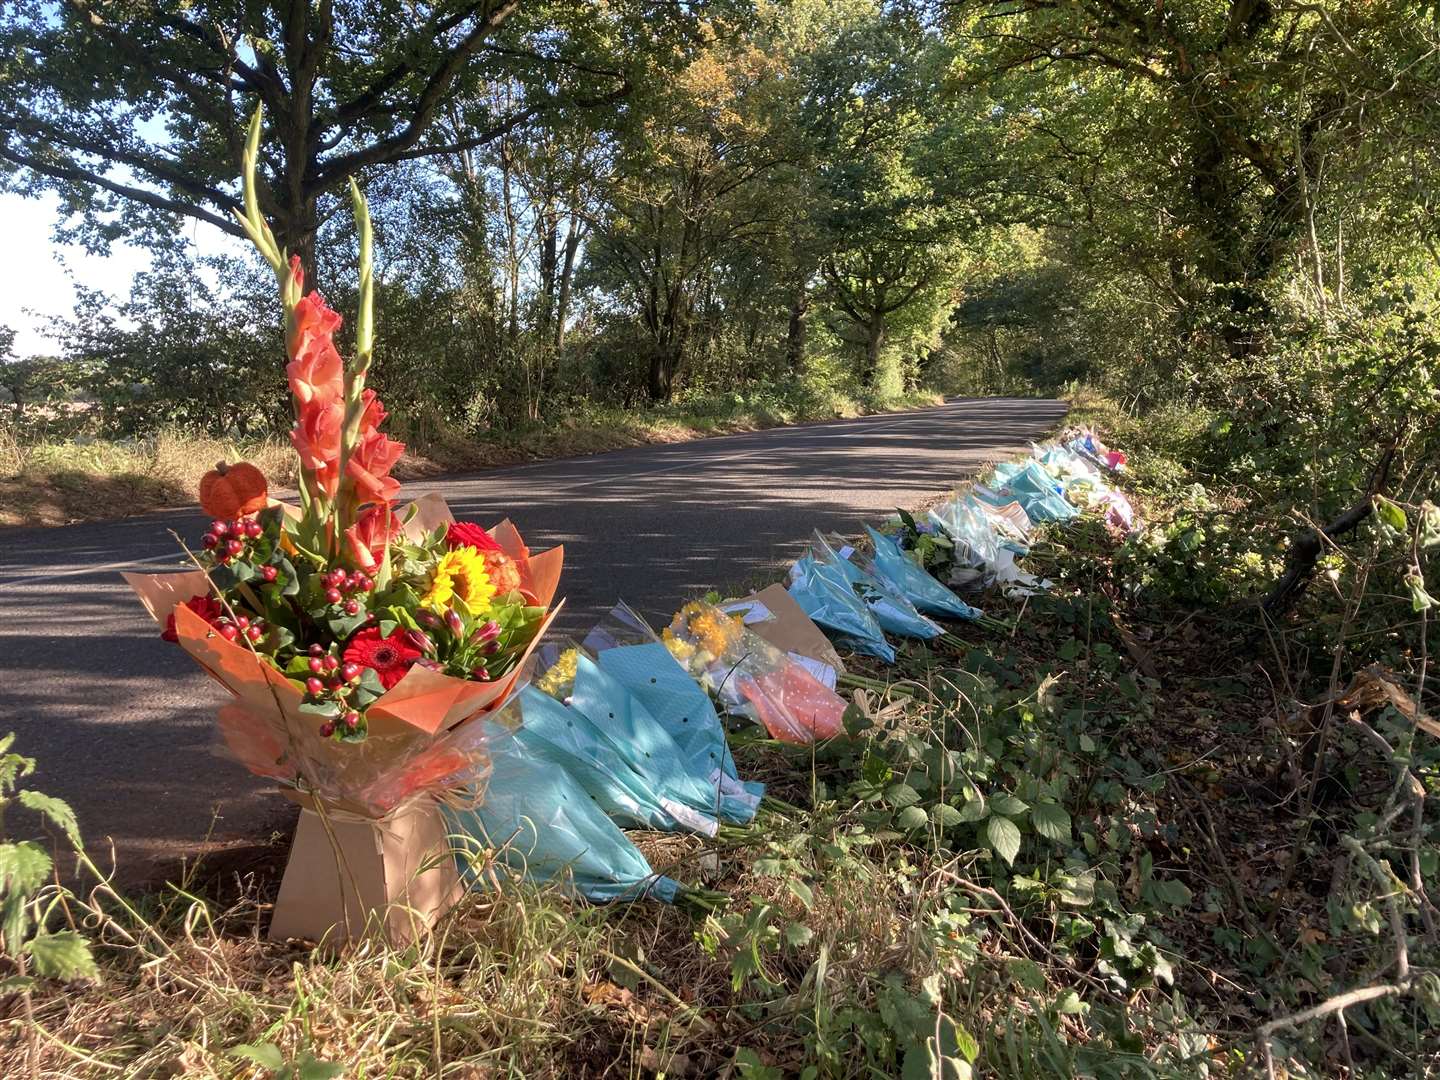 More than 50 floral tributes line Lenham Road, the scene of a crash which claimed four lives on Sunday, October 10